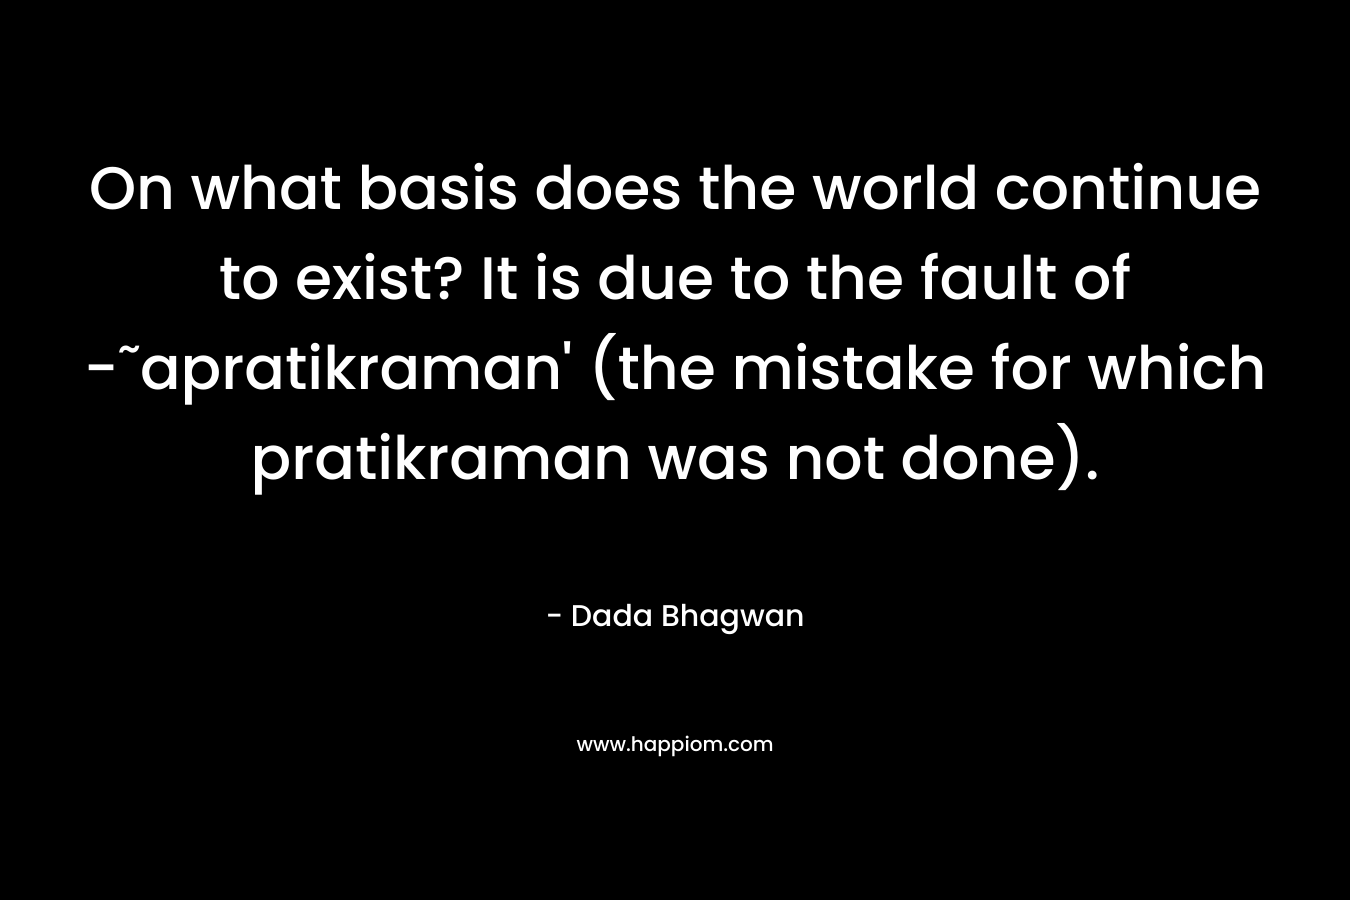 On what basis does the world continue to exist? It is due to the fault of -˜apratikraman' (the mistake for which pratikraman was not done).